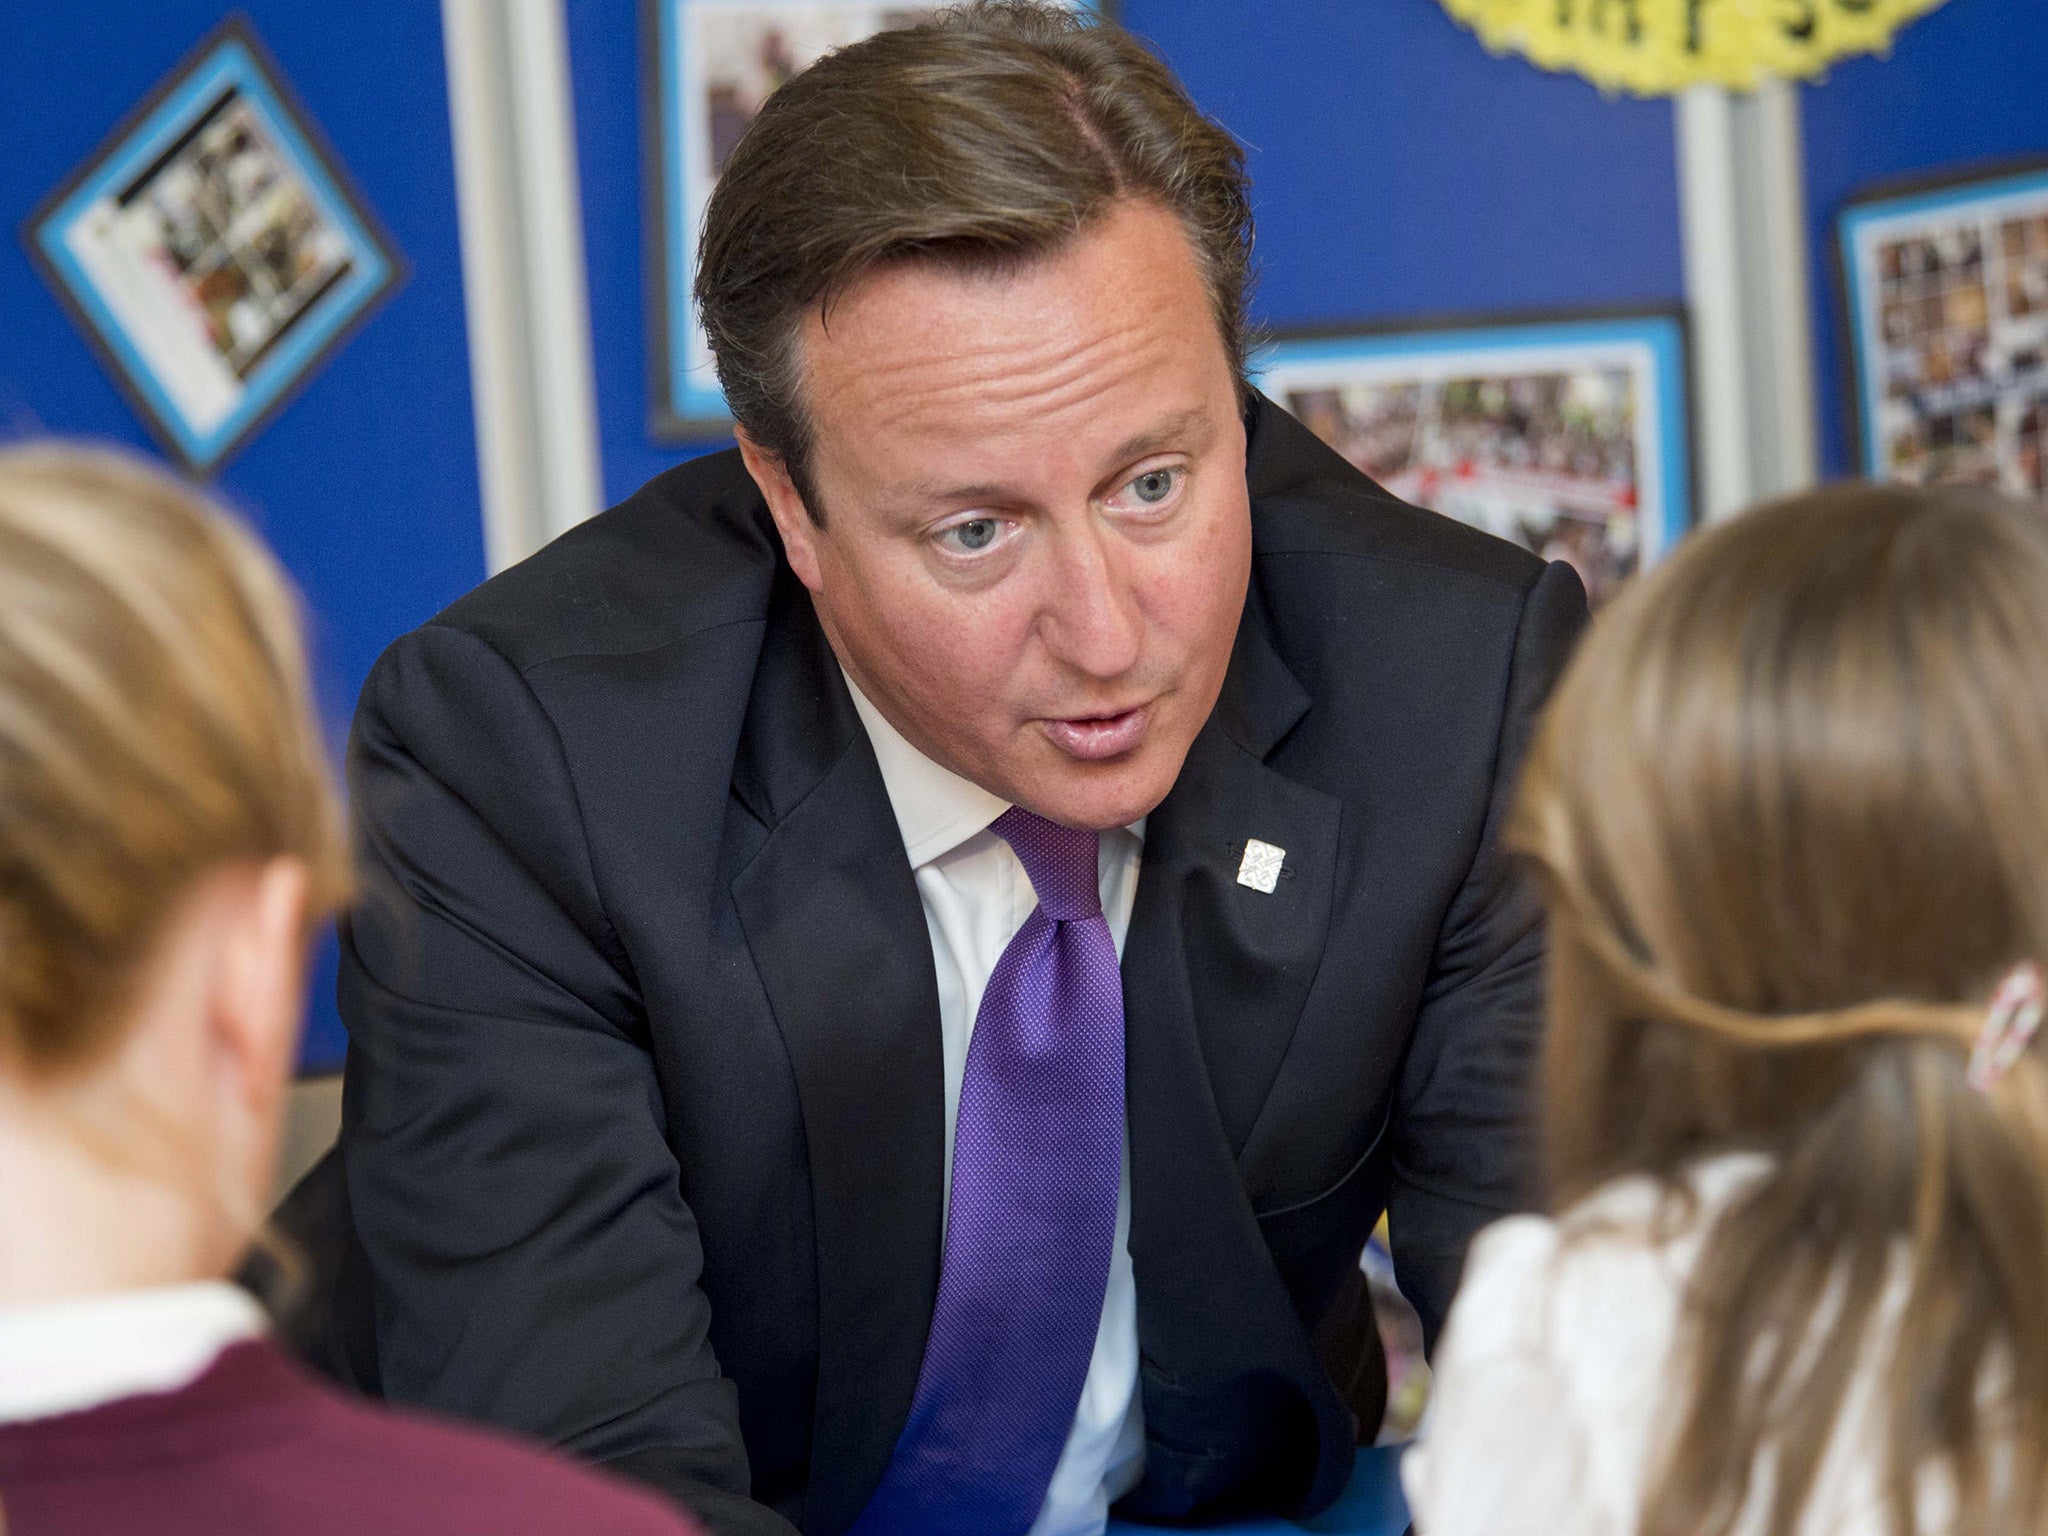 David Cameron was stumped by the question from the schoolgirl